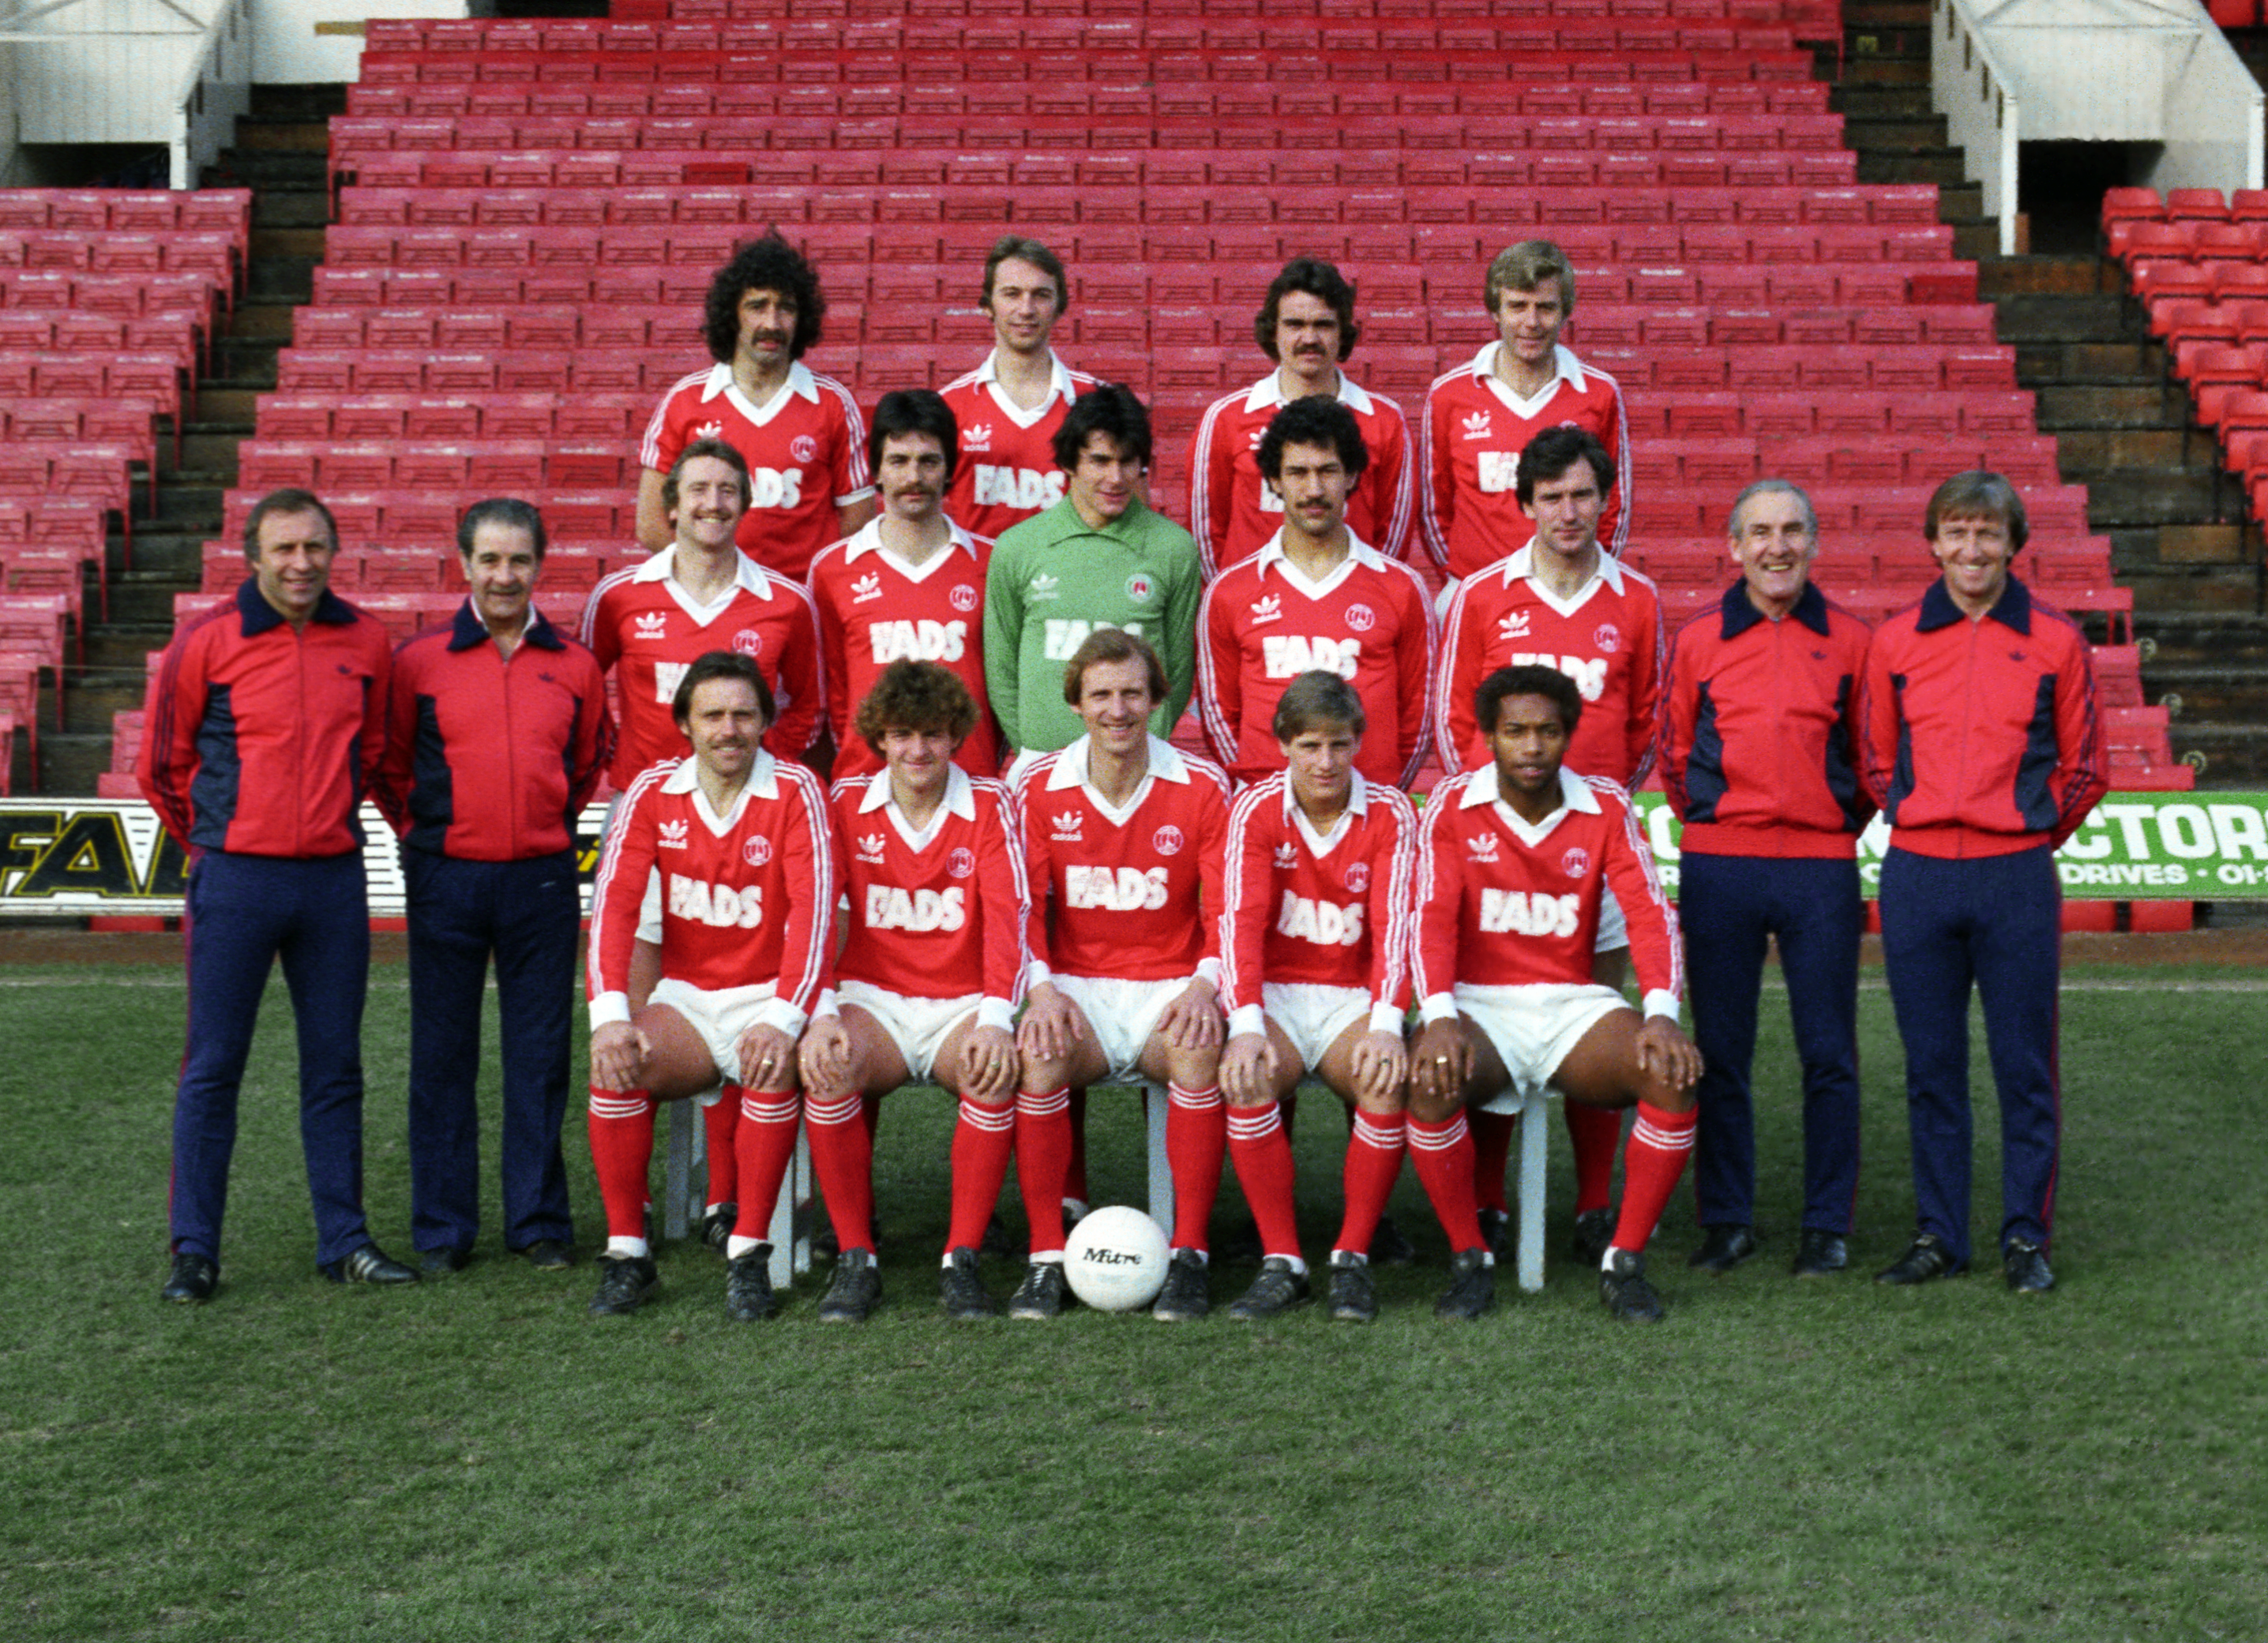 The Charlton squad photographed midway through the 1980/81 campaign